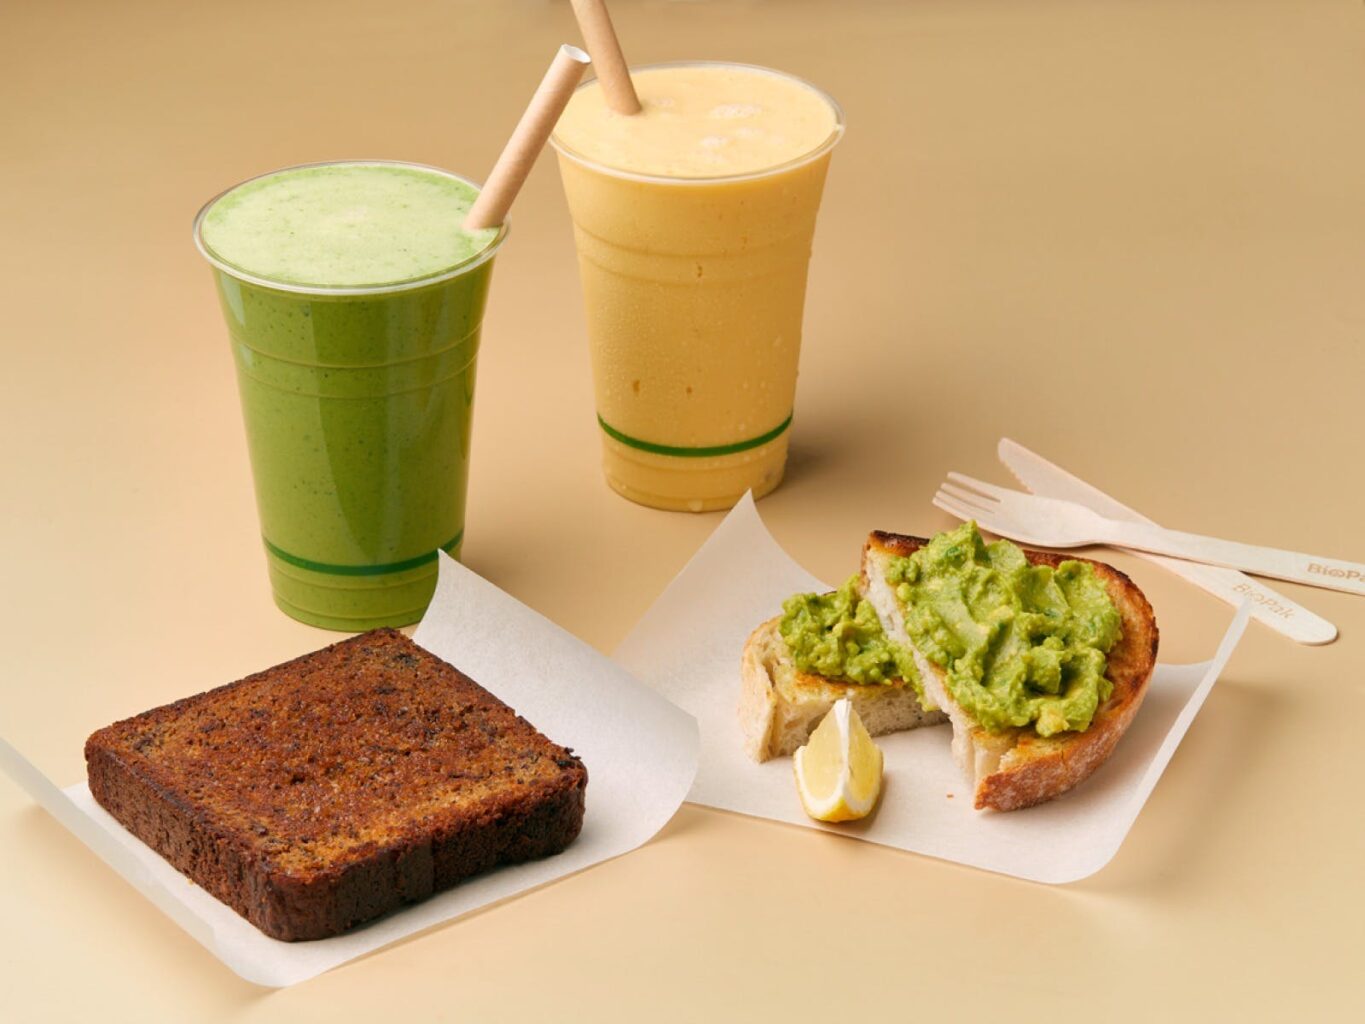 Oliver's banana bread and avocado on sourdough, with green smoothie and mango smoothie